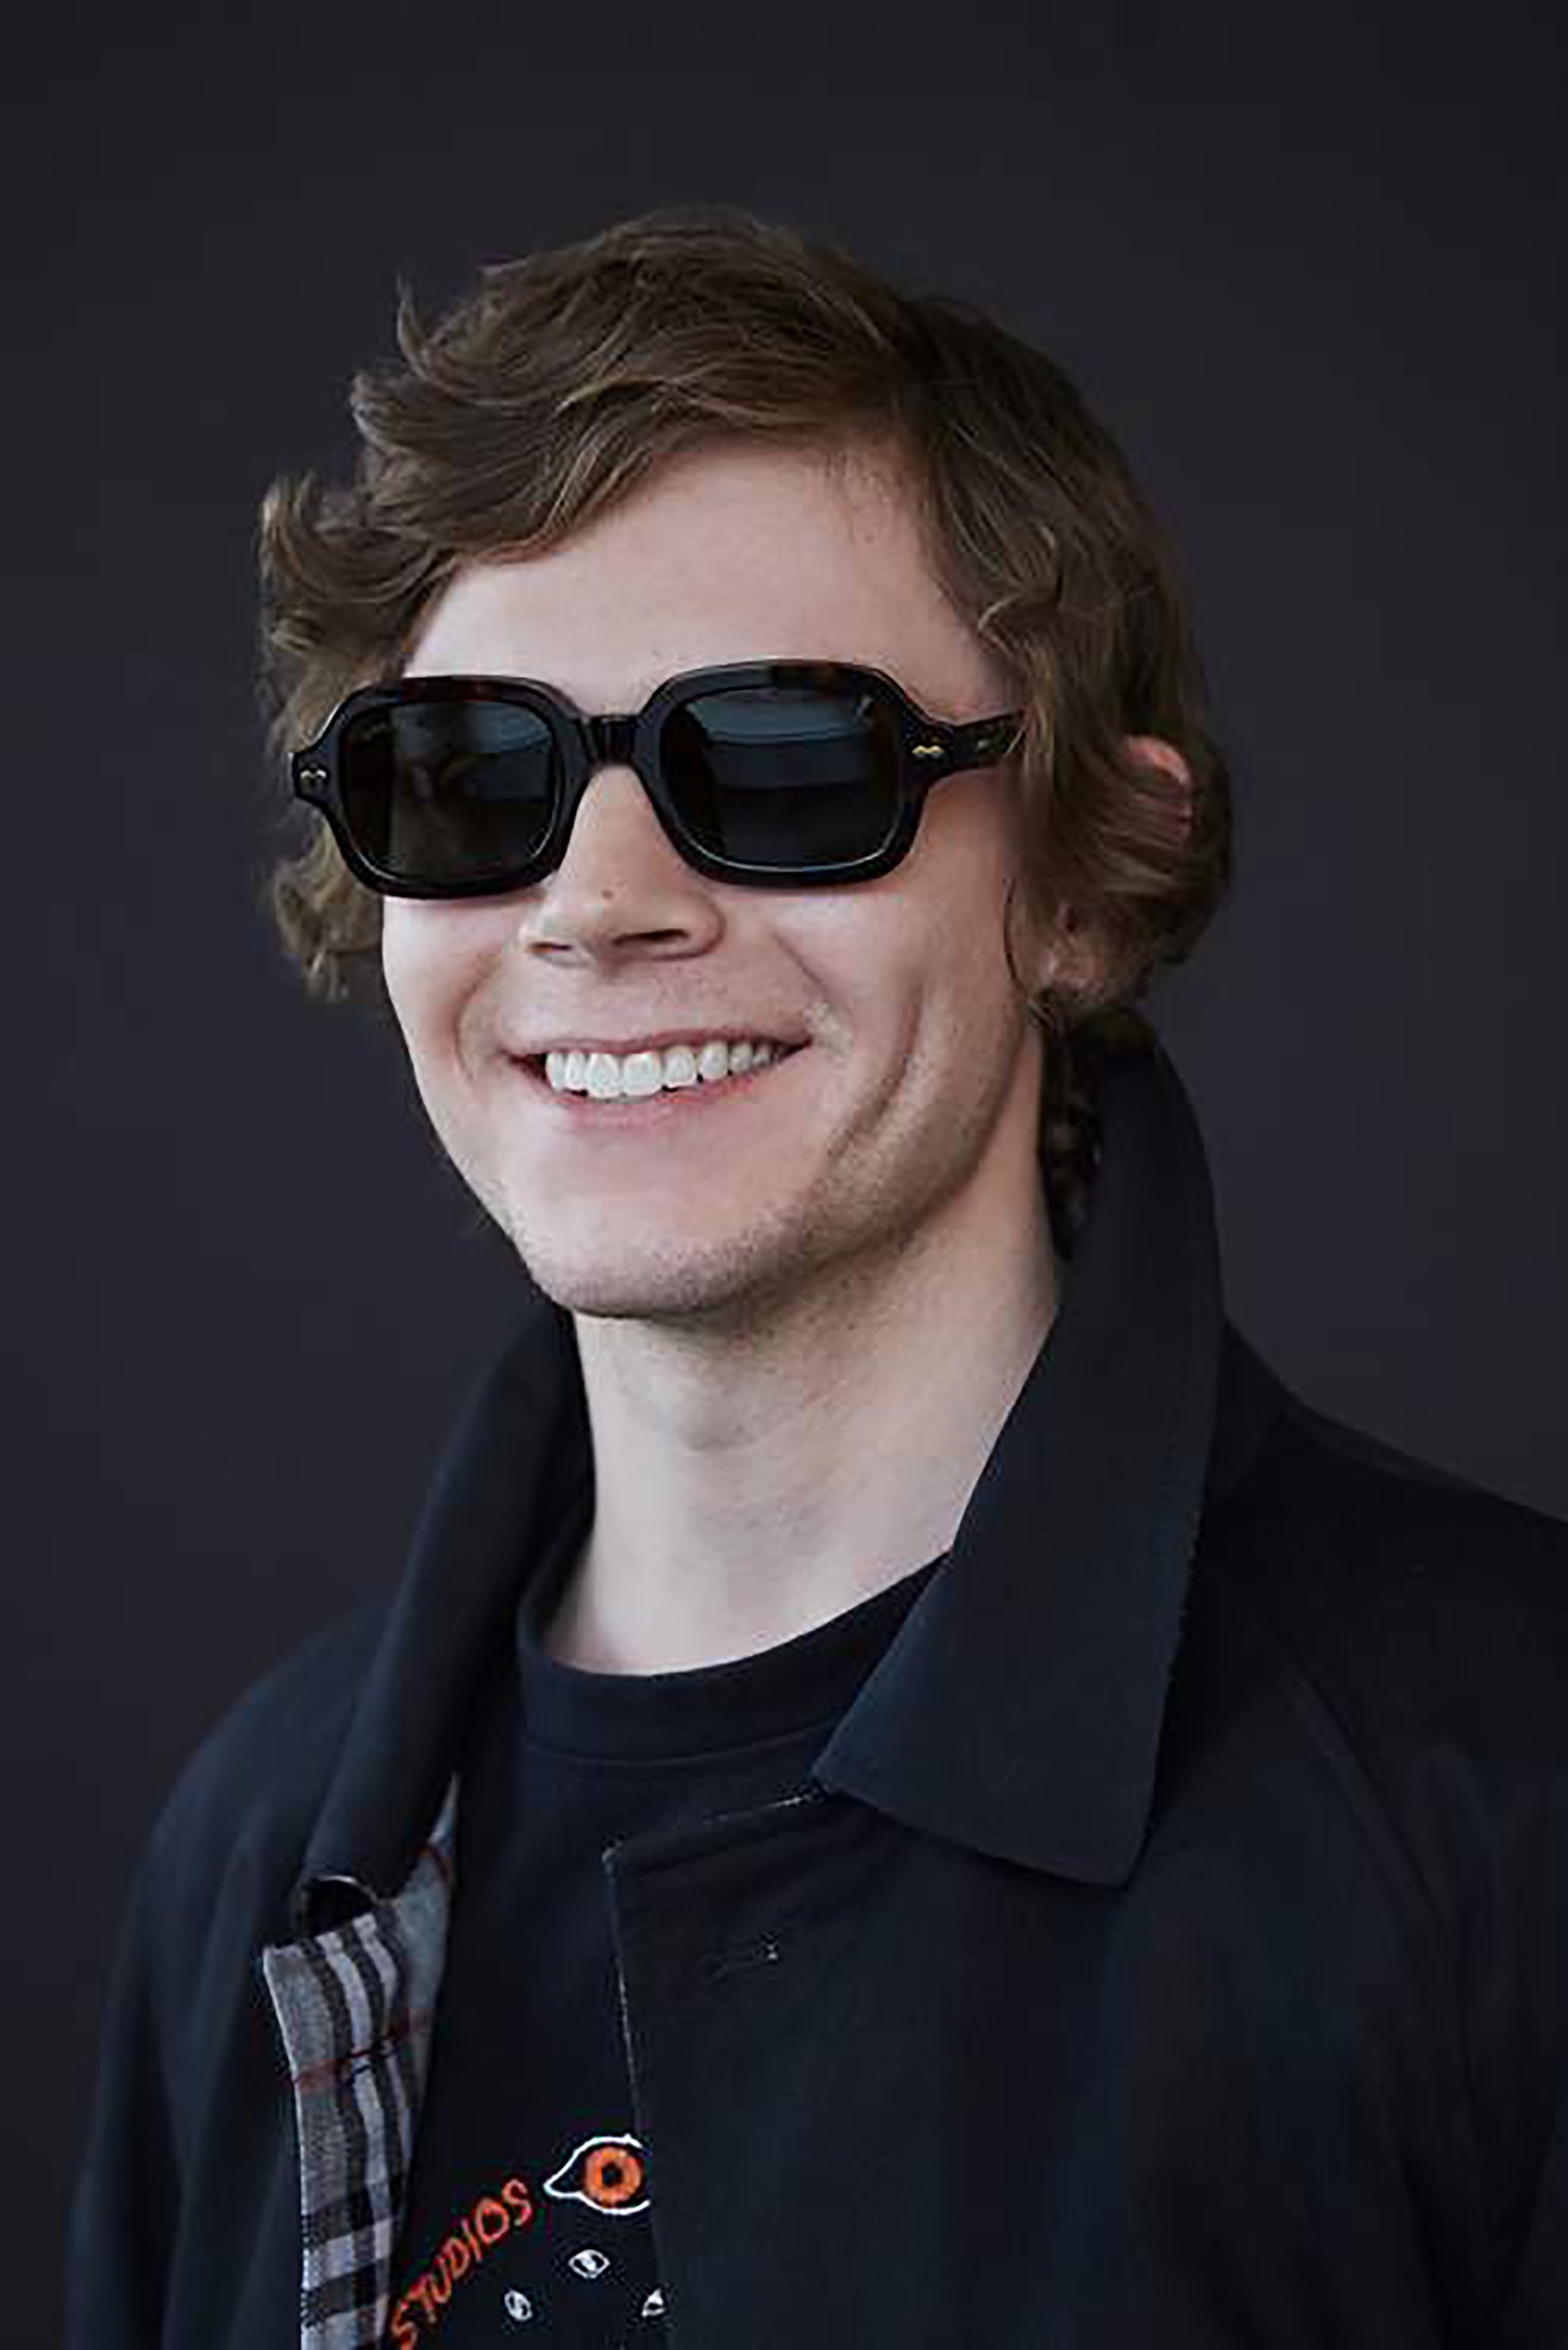 evan-peters-opens-up-about-his-role-in-pose-01.jpg